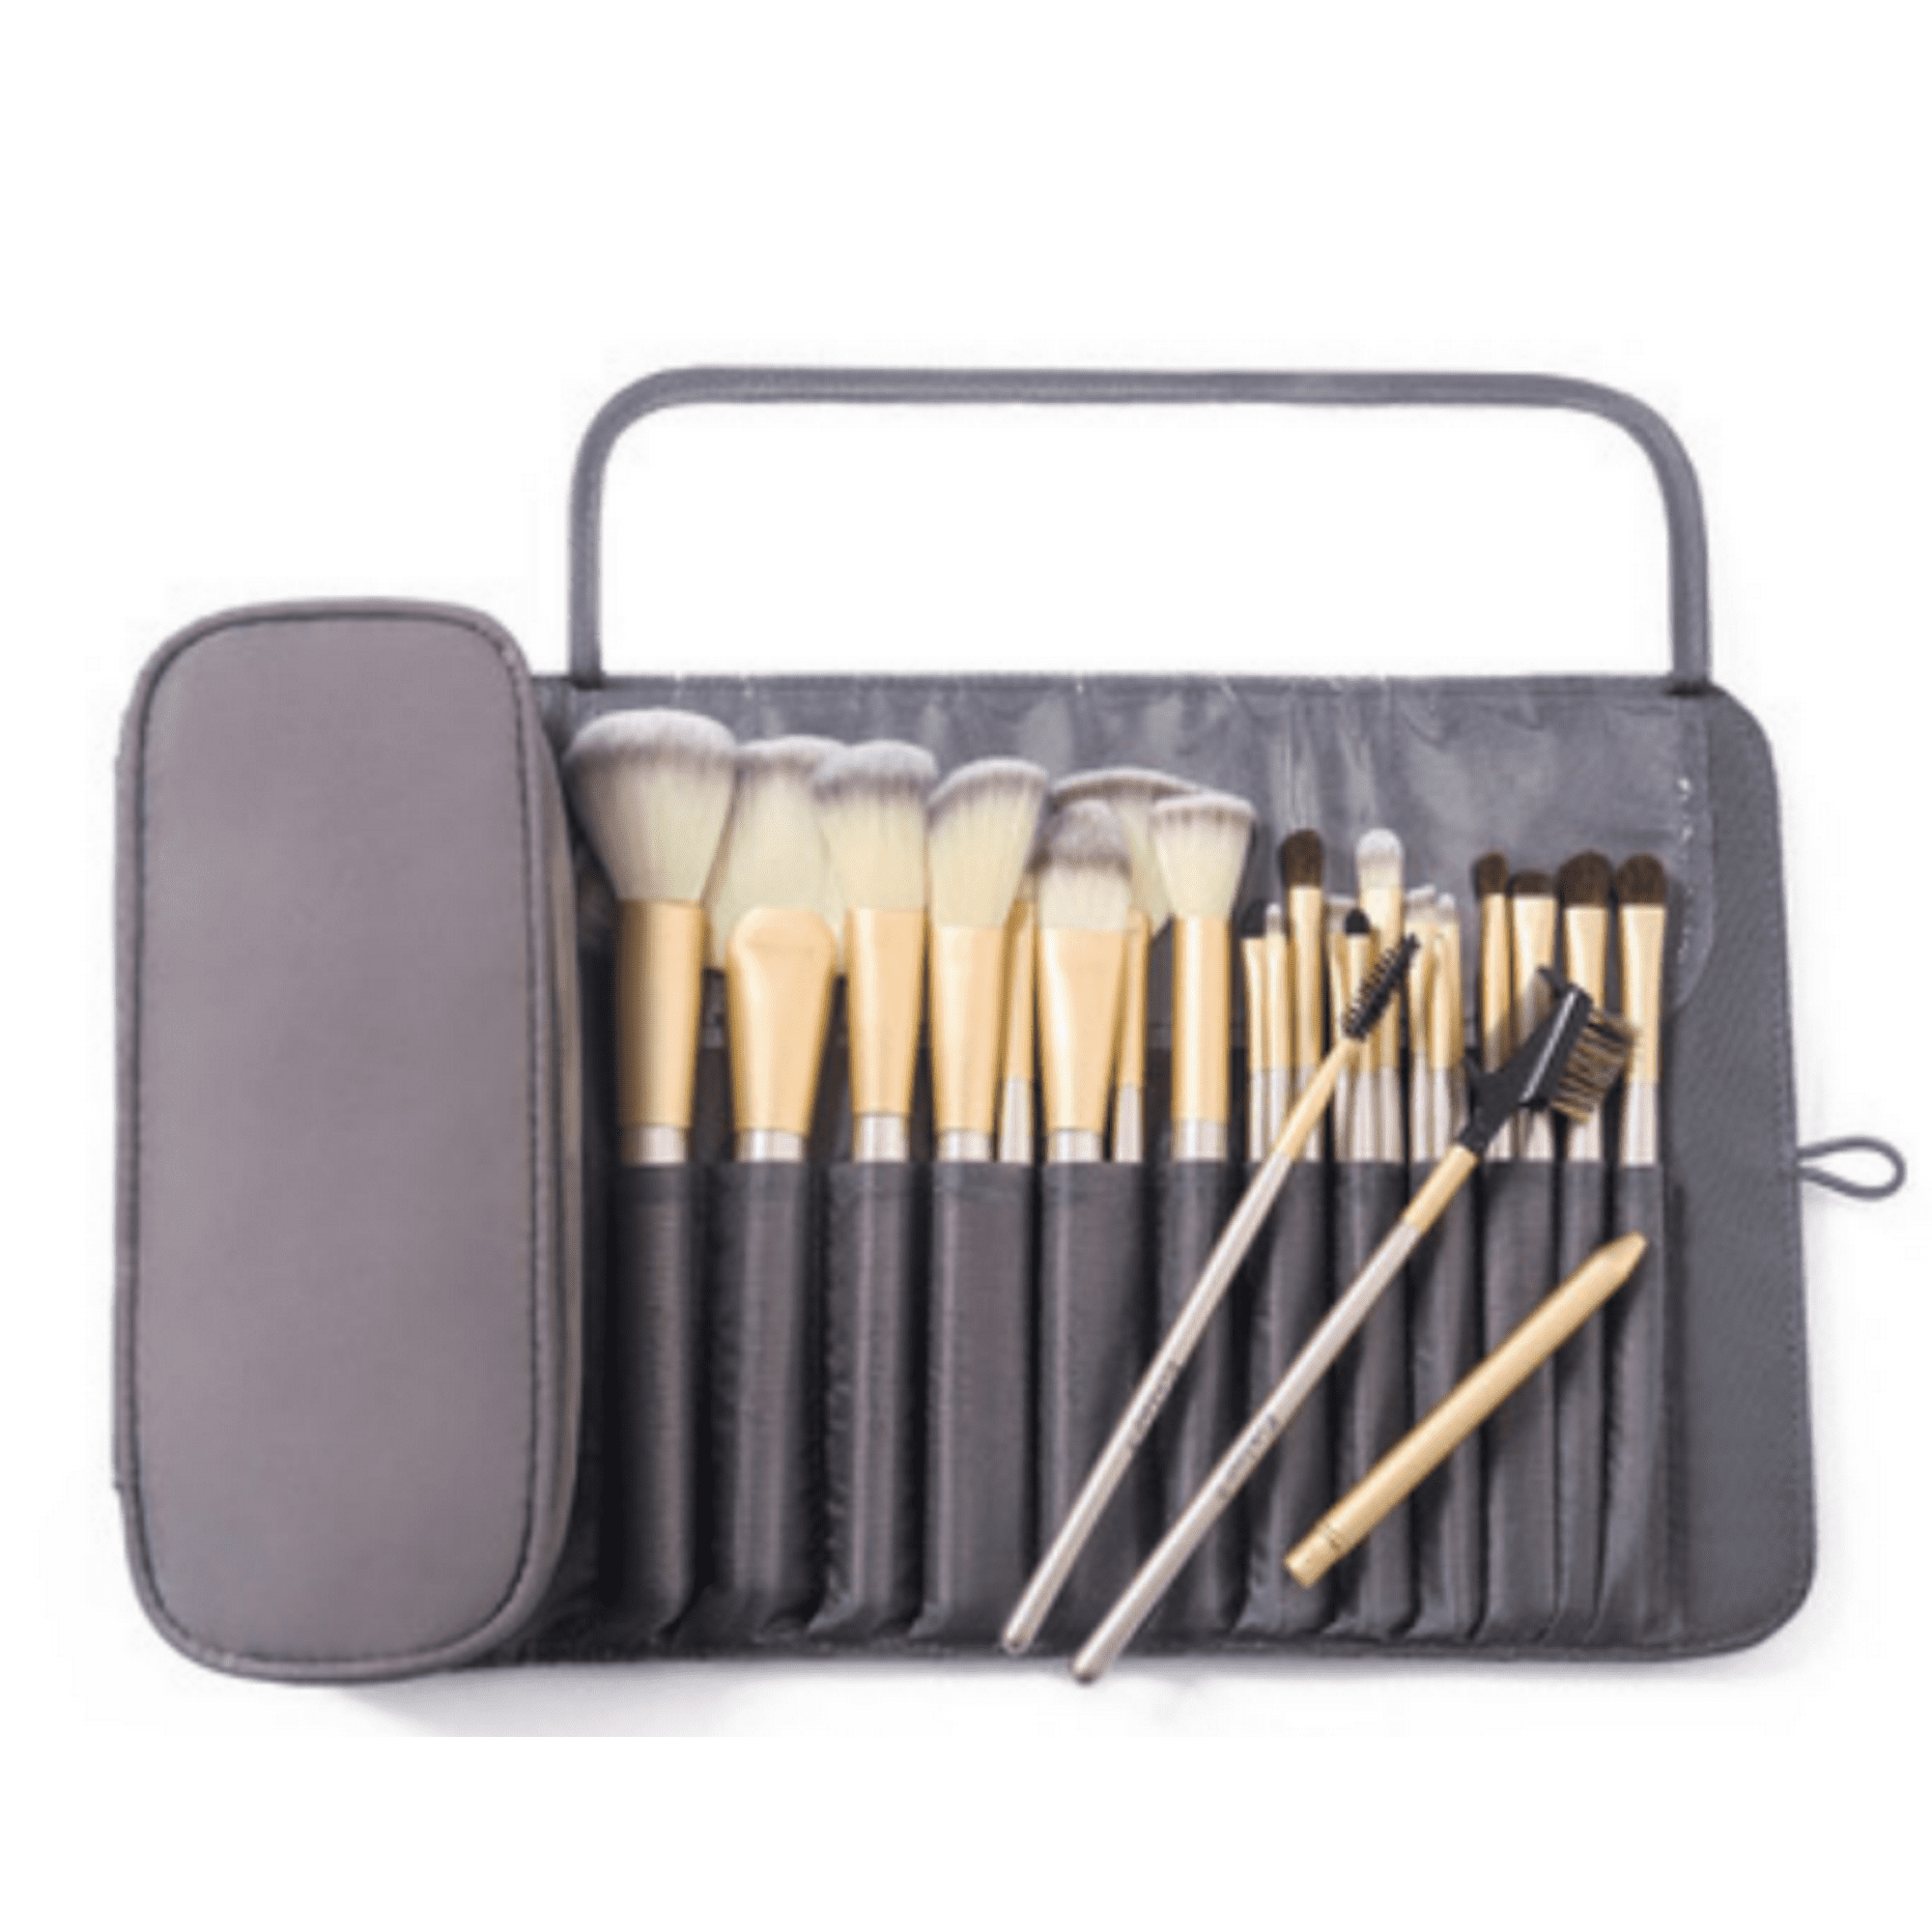 Portable Makeup Brush Organizer Makeup Brush Bag for Travel Can Hold 20+ Brushes  Cosmetic Bag Makeup Brush Roll Up Case Pouch Holder for Woman 